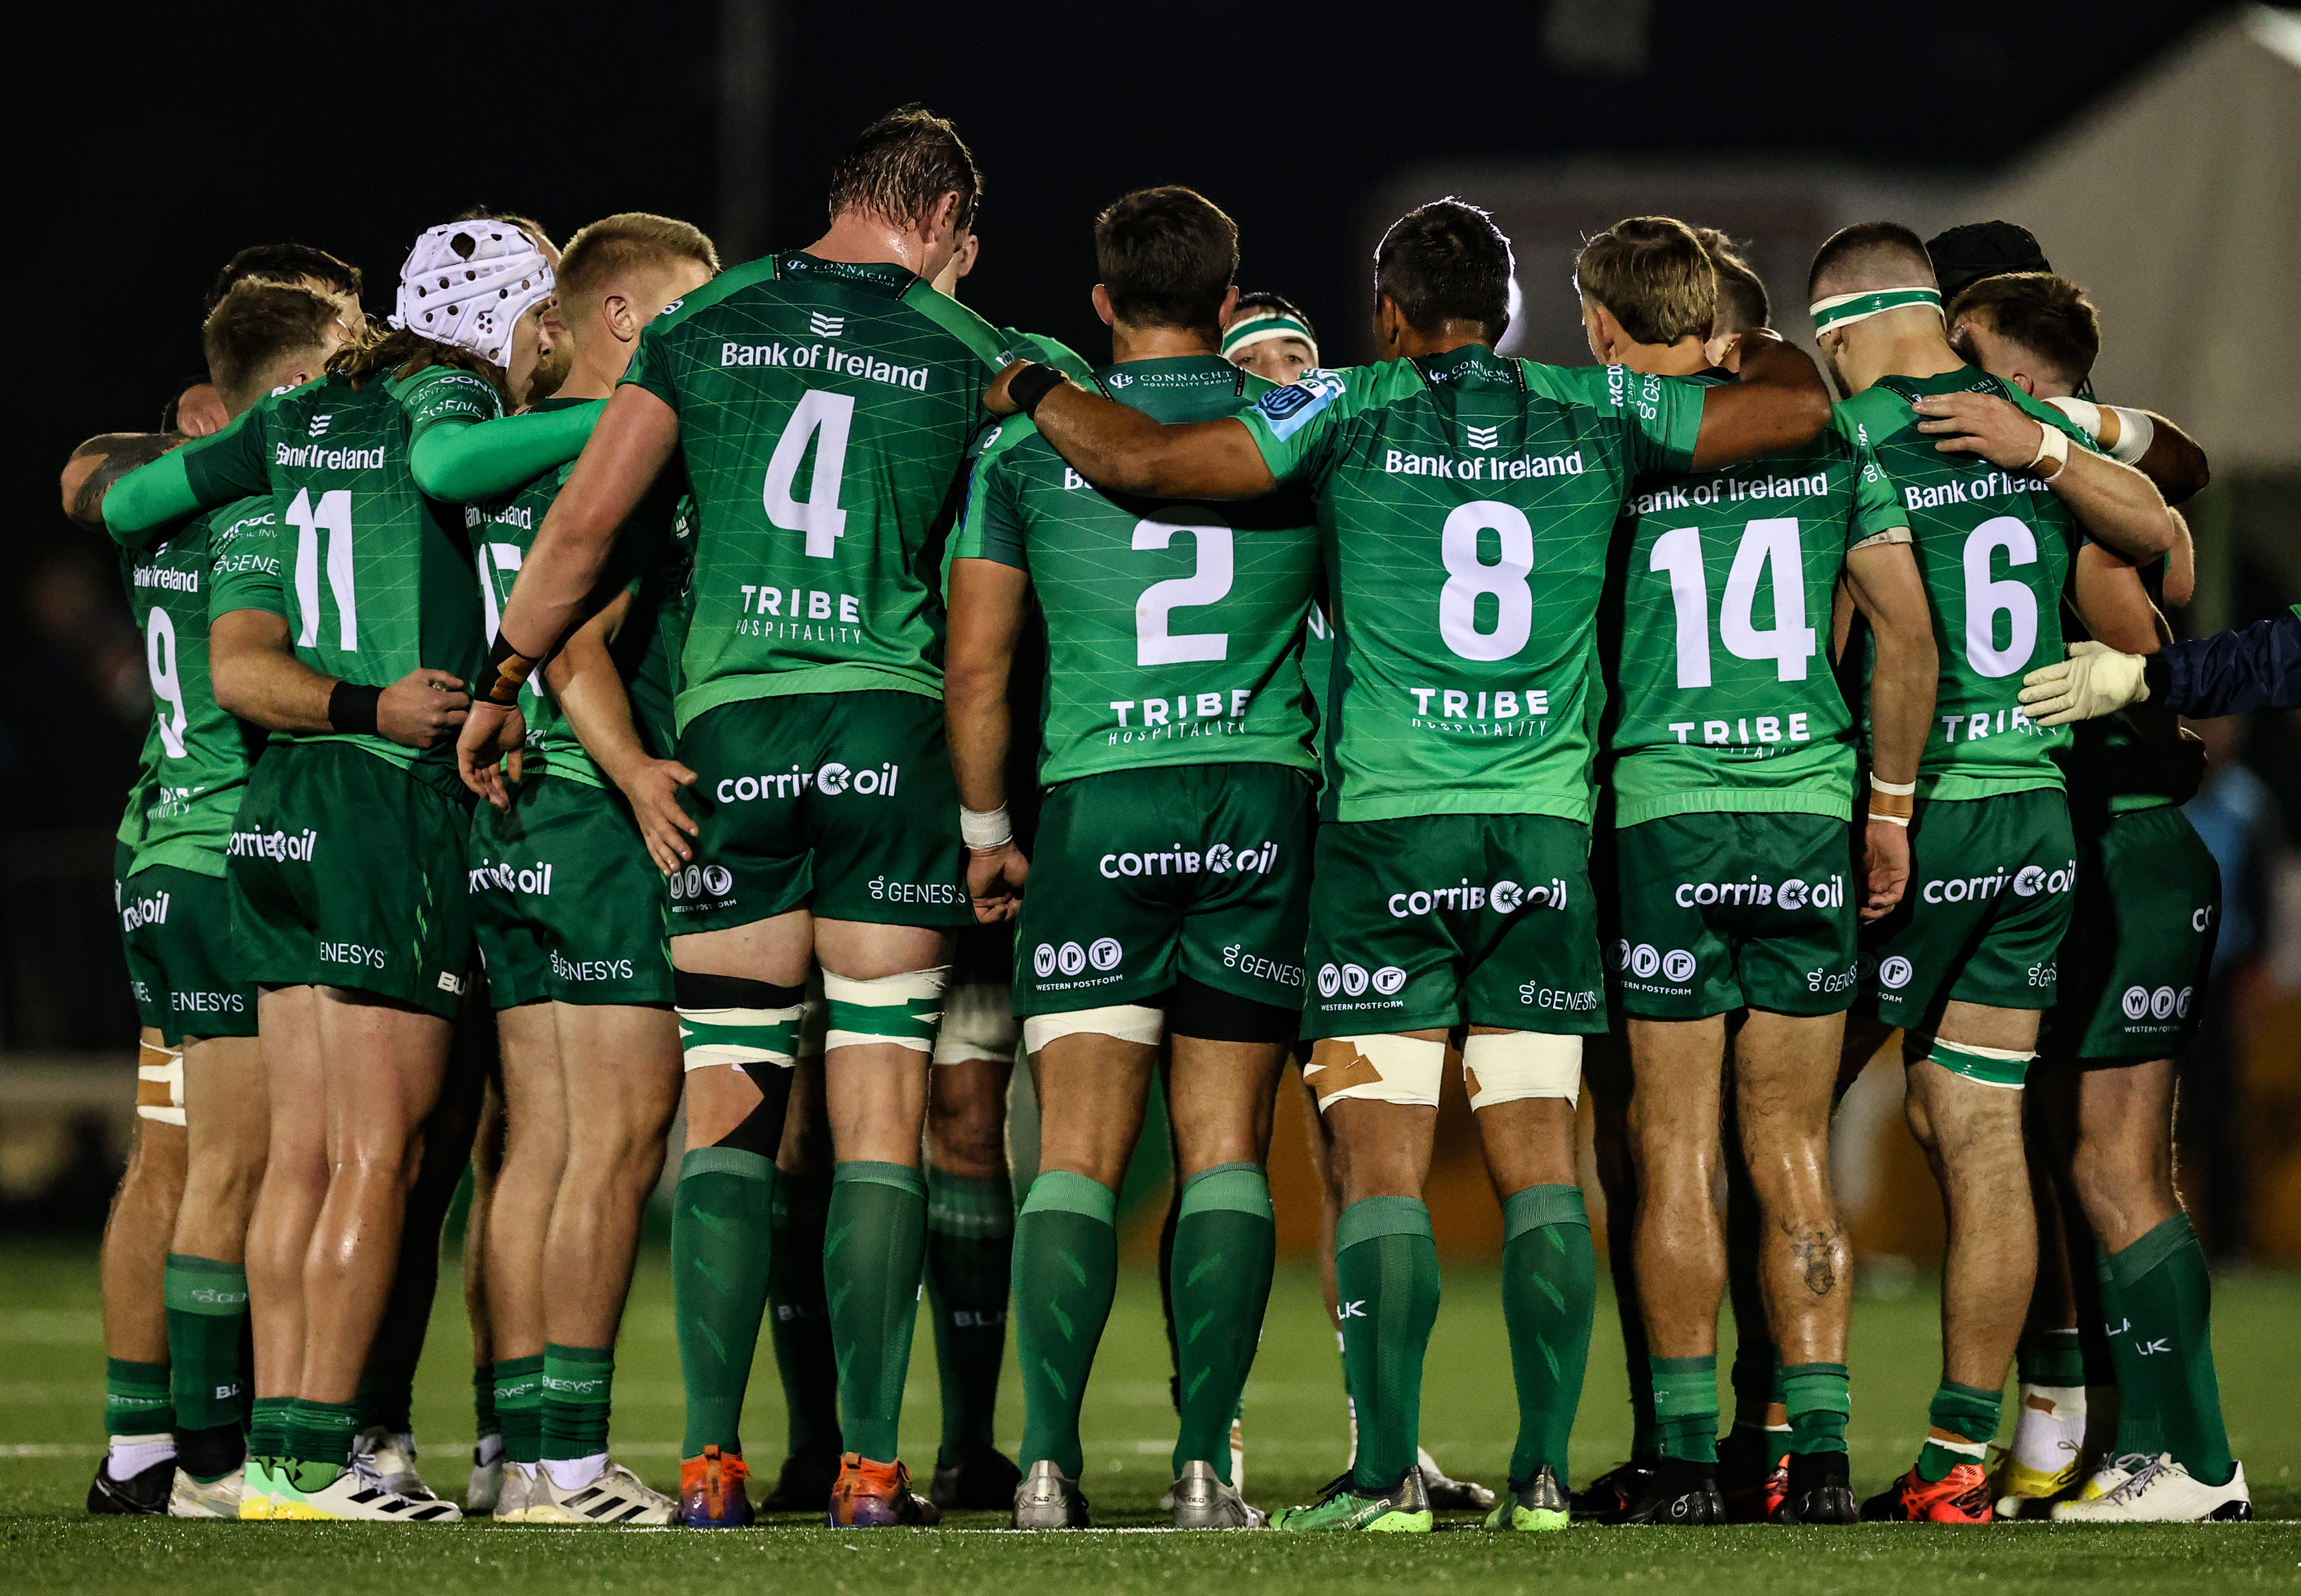 Relentless The Connacht Way feels like a rugby promo reel, all rucknroll hagiography